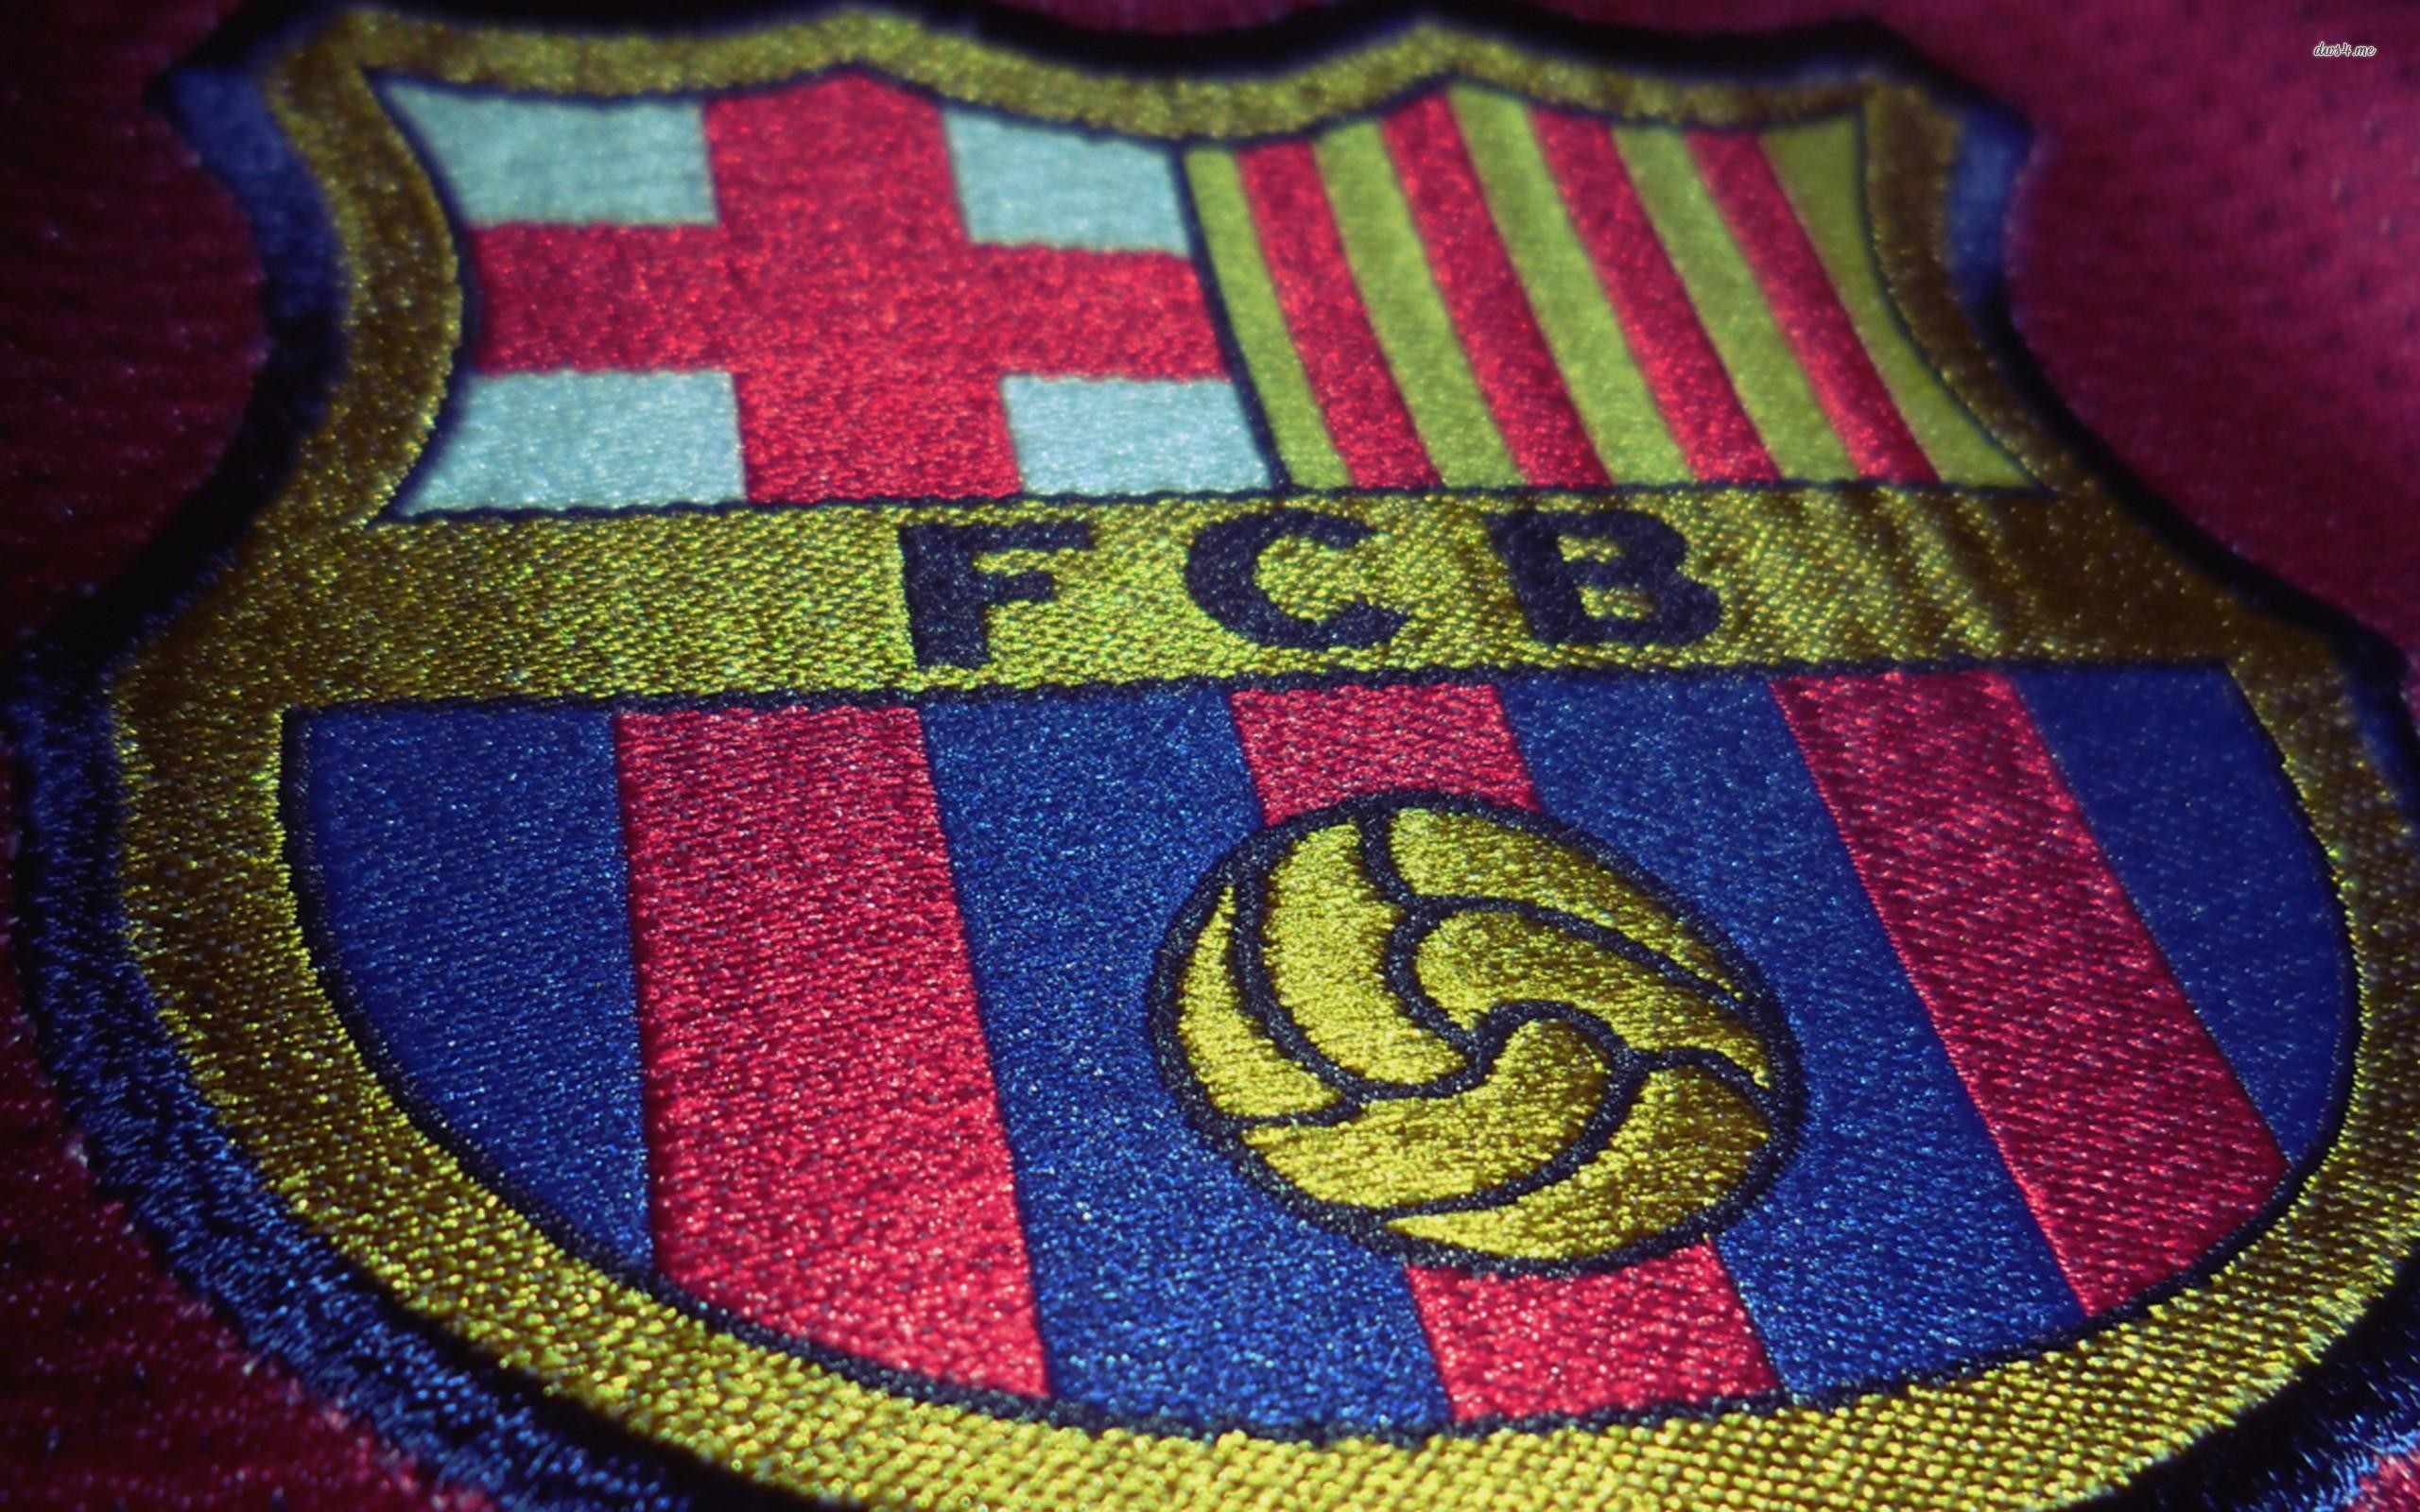 2560x1600 Barcelona FC wallpapers for iphone